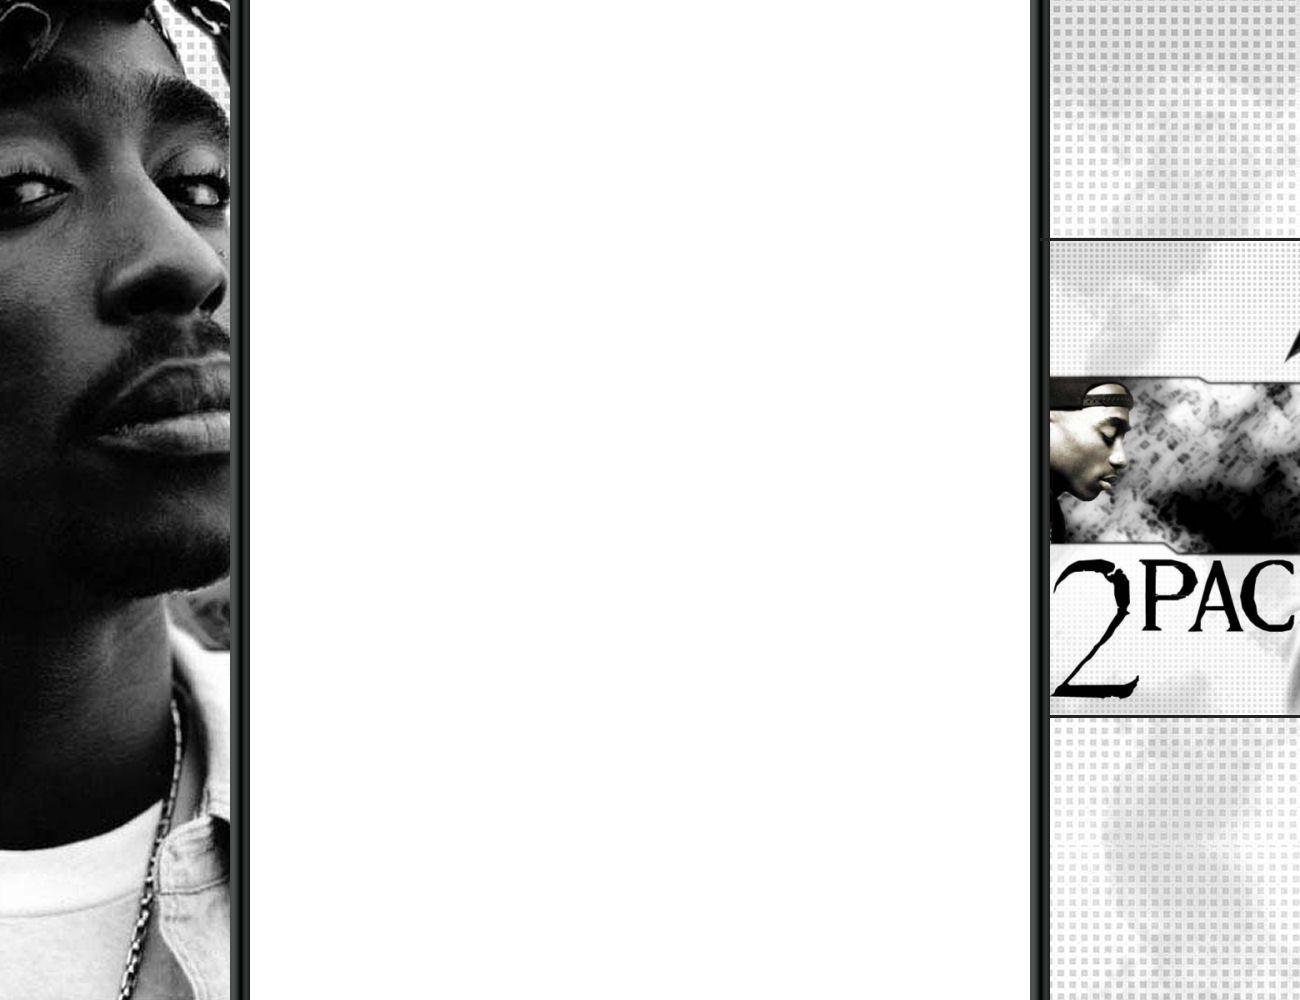 2Pac Twitter Background, 2Pac Twitter Themes